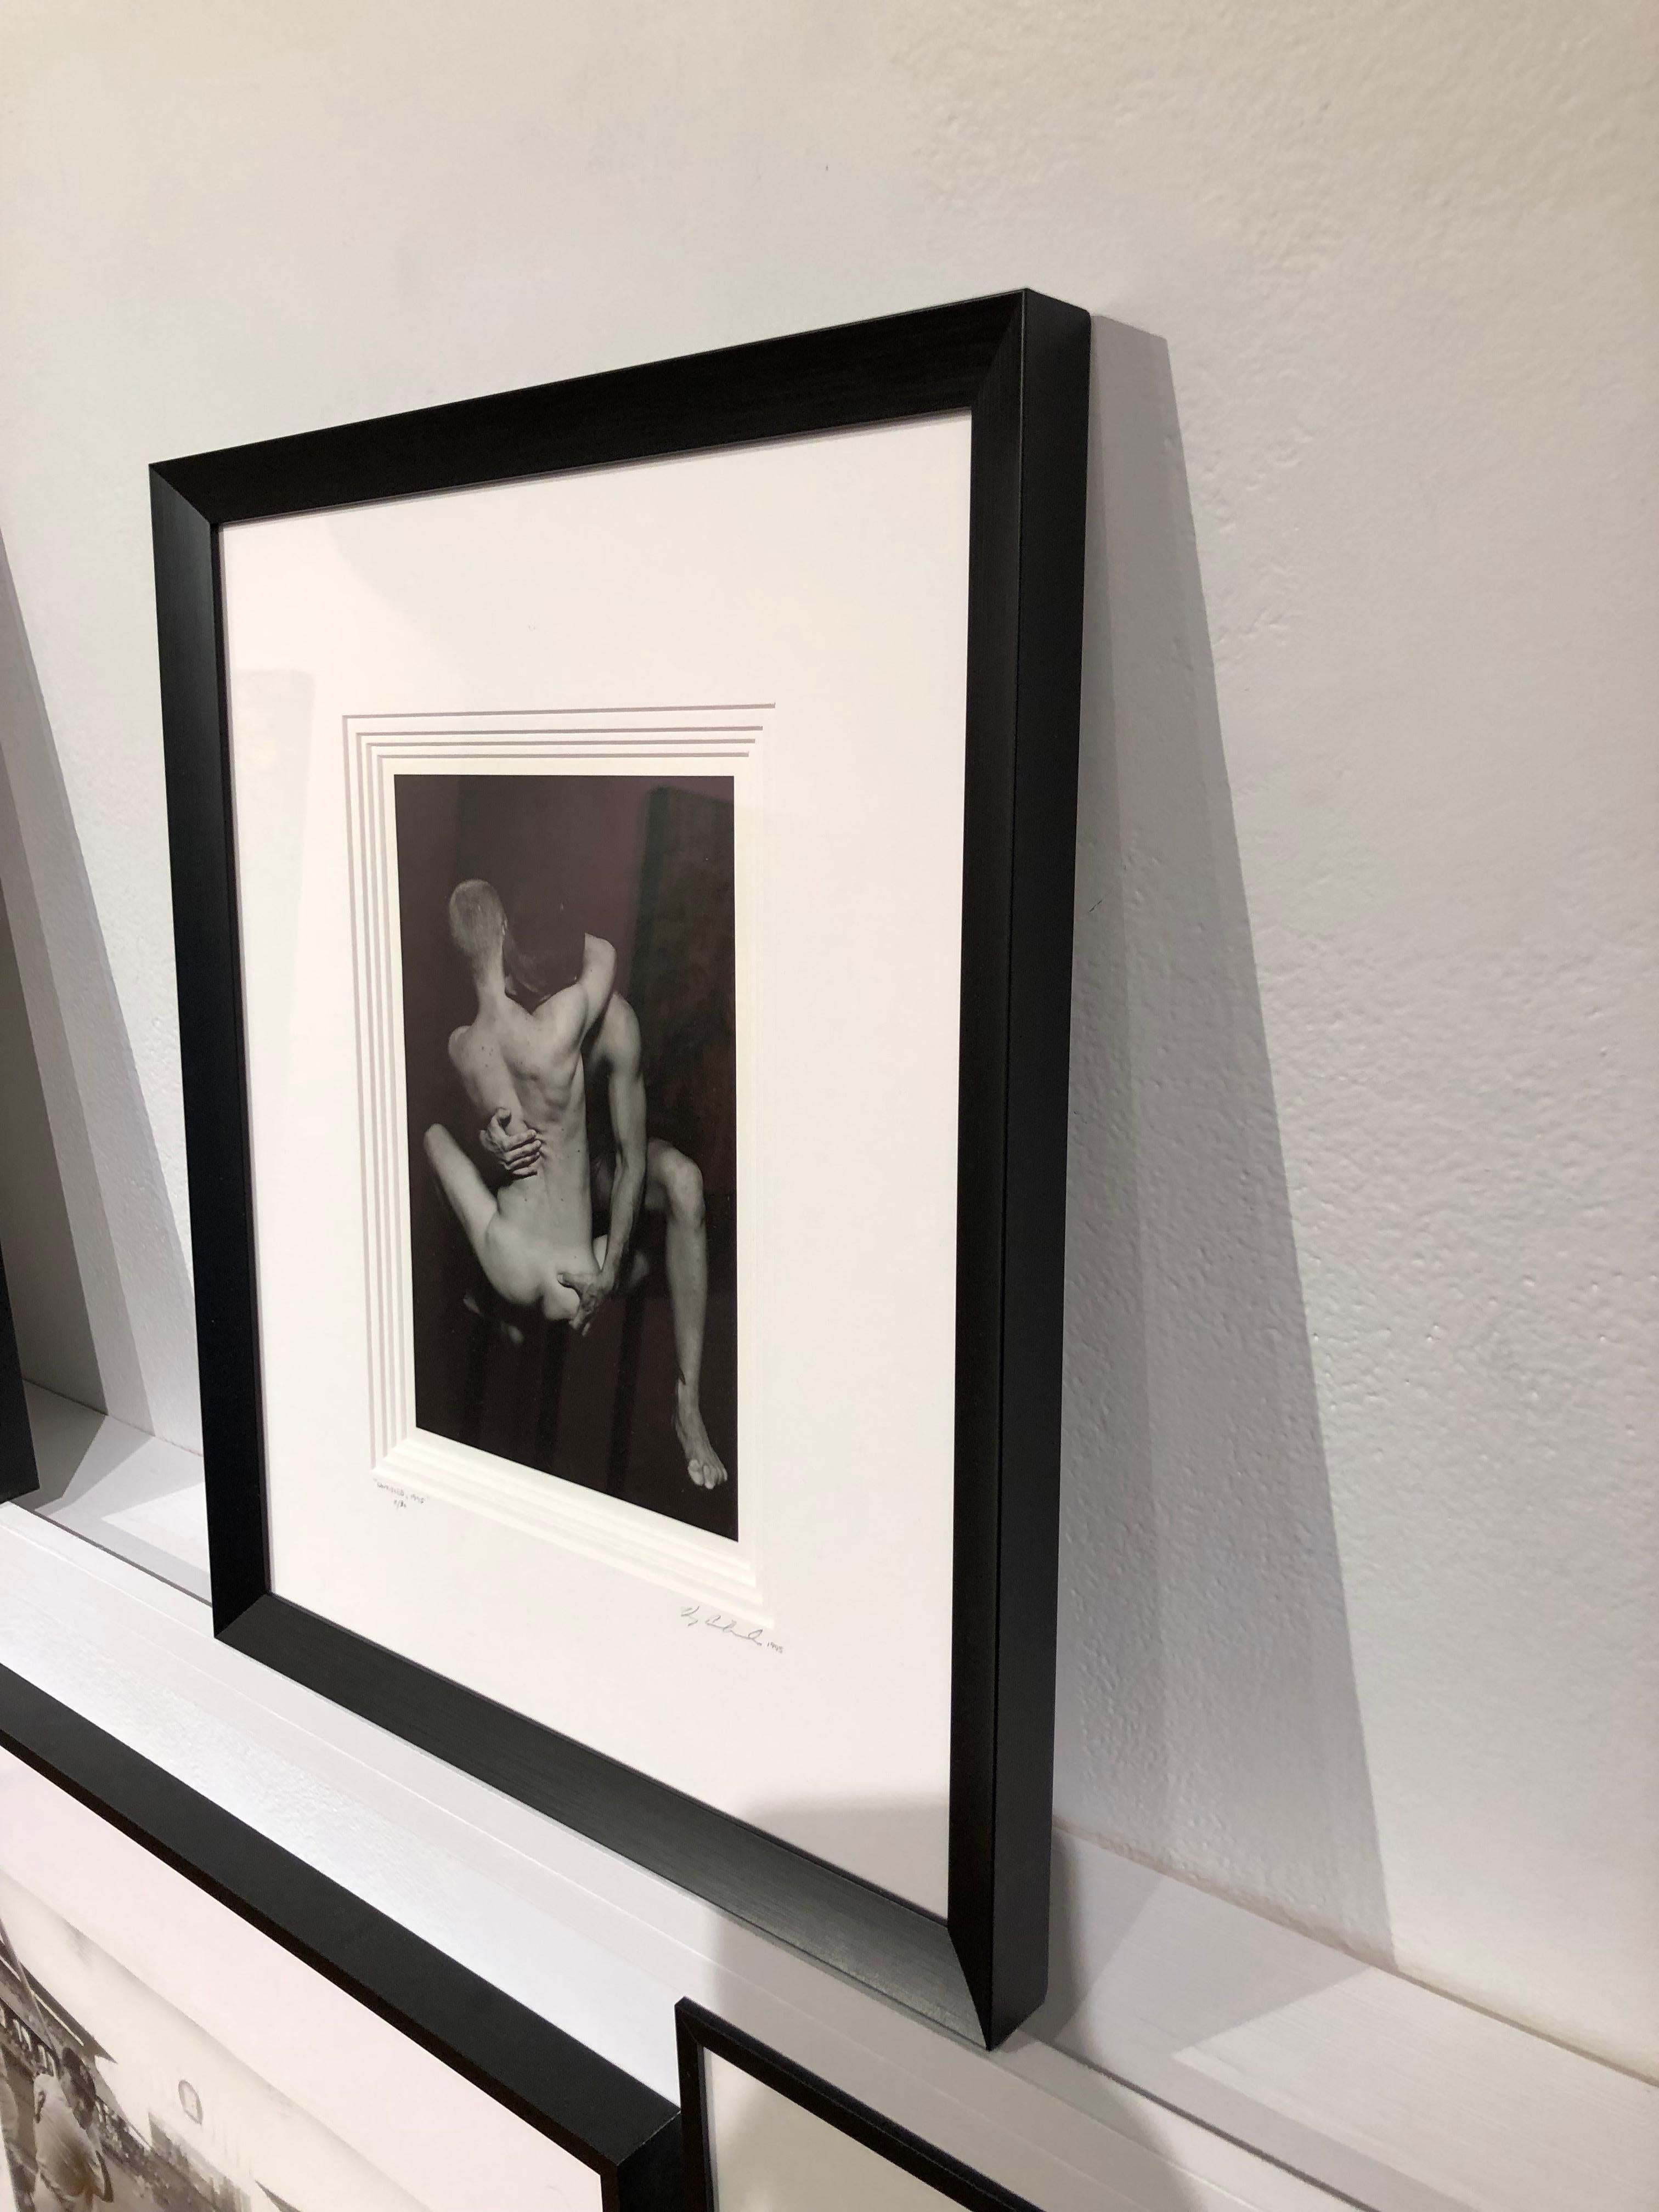 This intimate photograph shows two figures embracing, their faces are hidden, adding to its mystery.  The photo is matted in black and framed in a dark silver frame with non reflective museum glass.

Doug Birkenheuer
Untitled (Stone & Miles)
silver